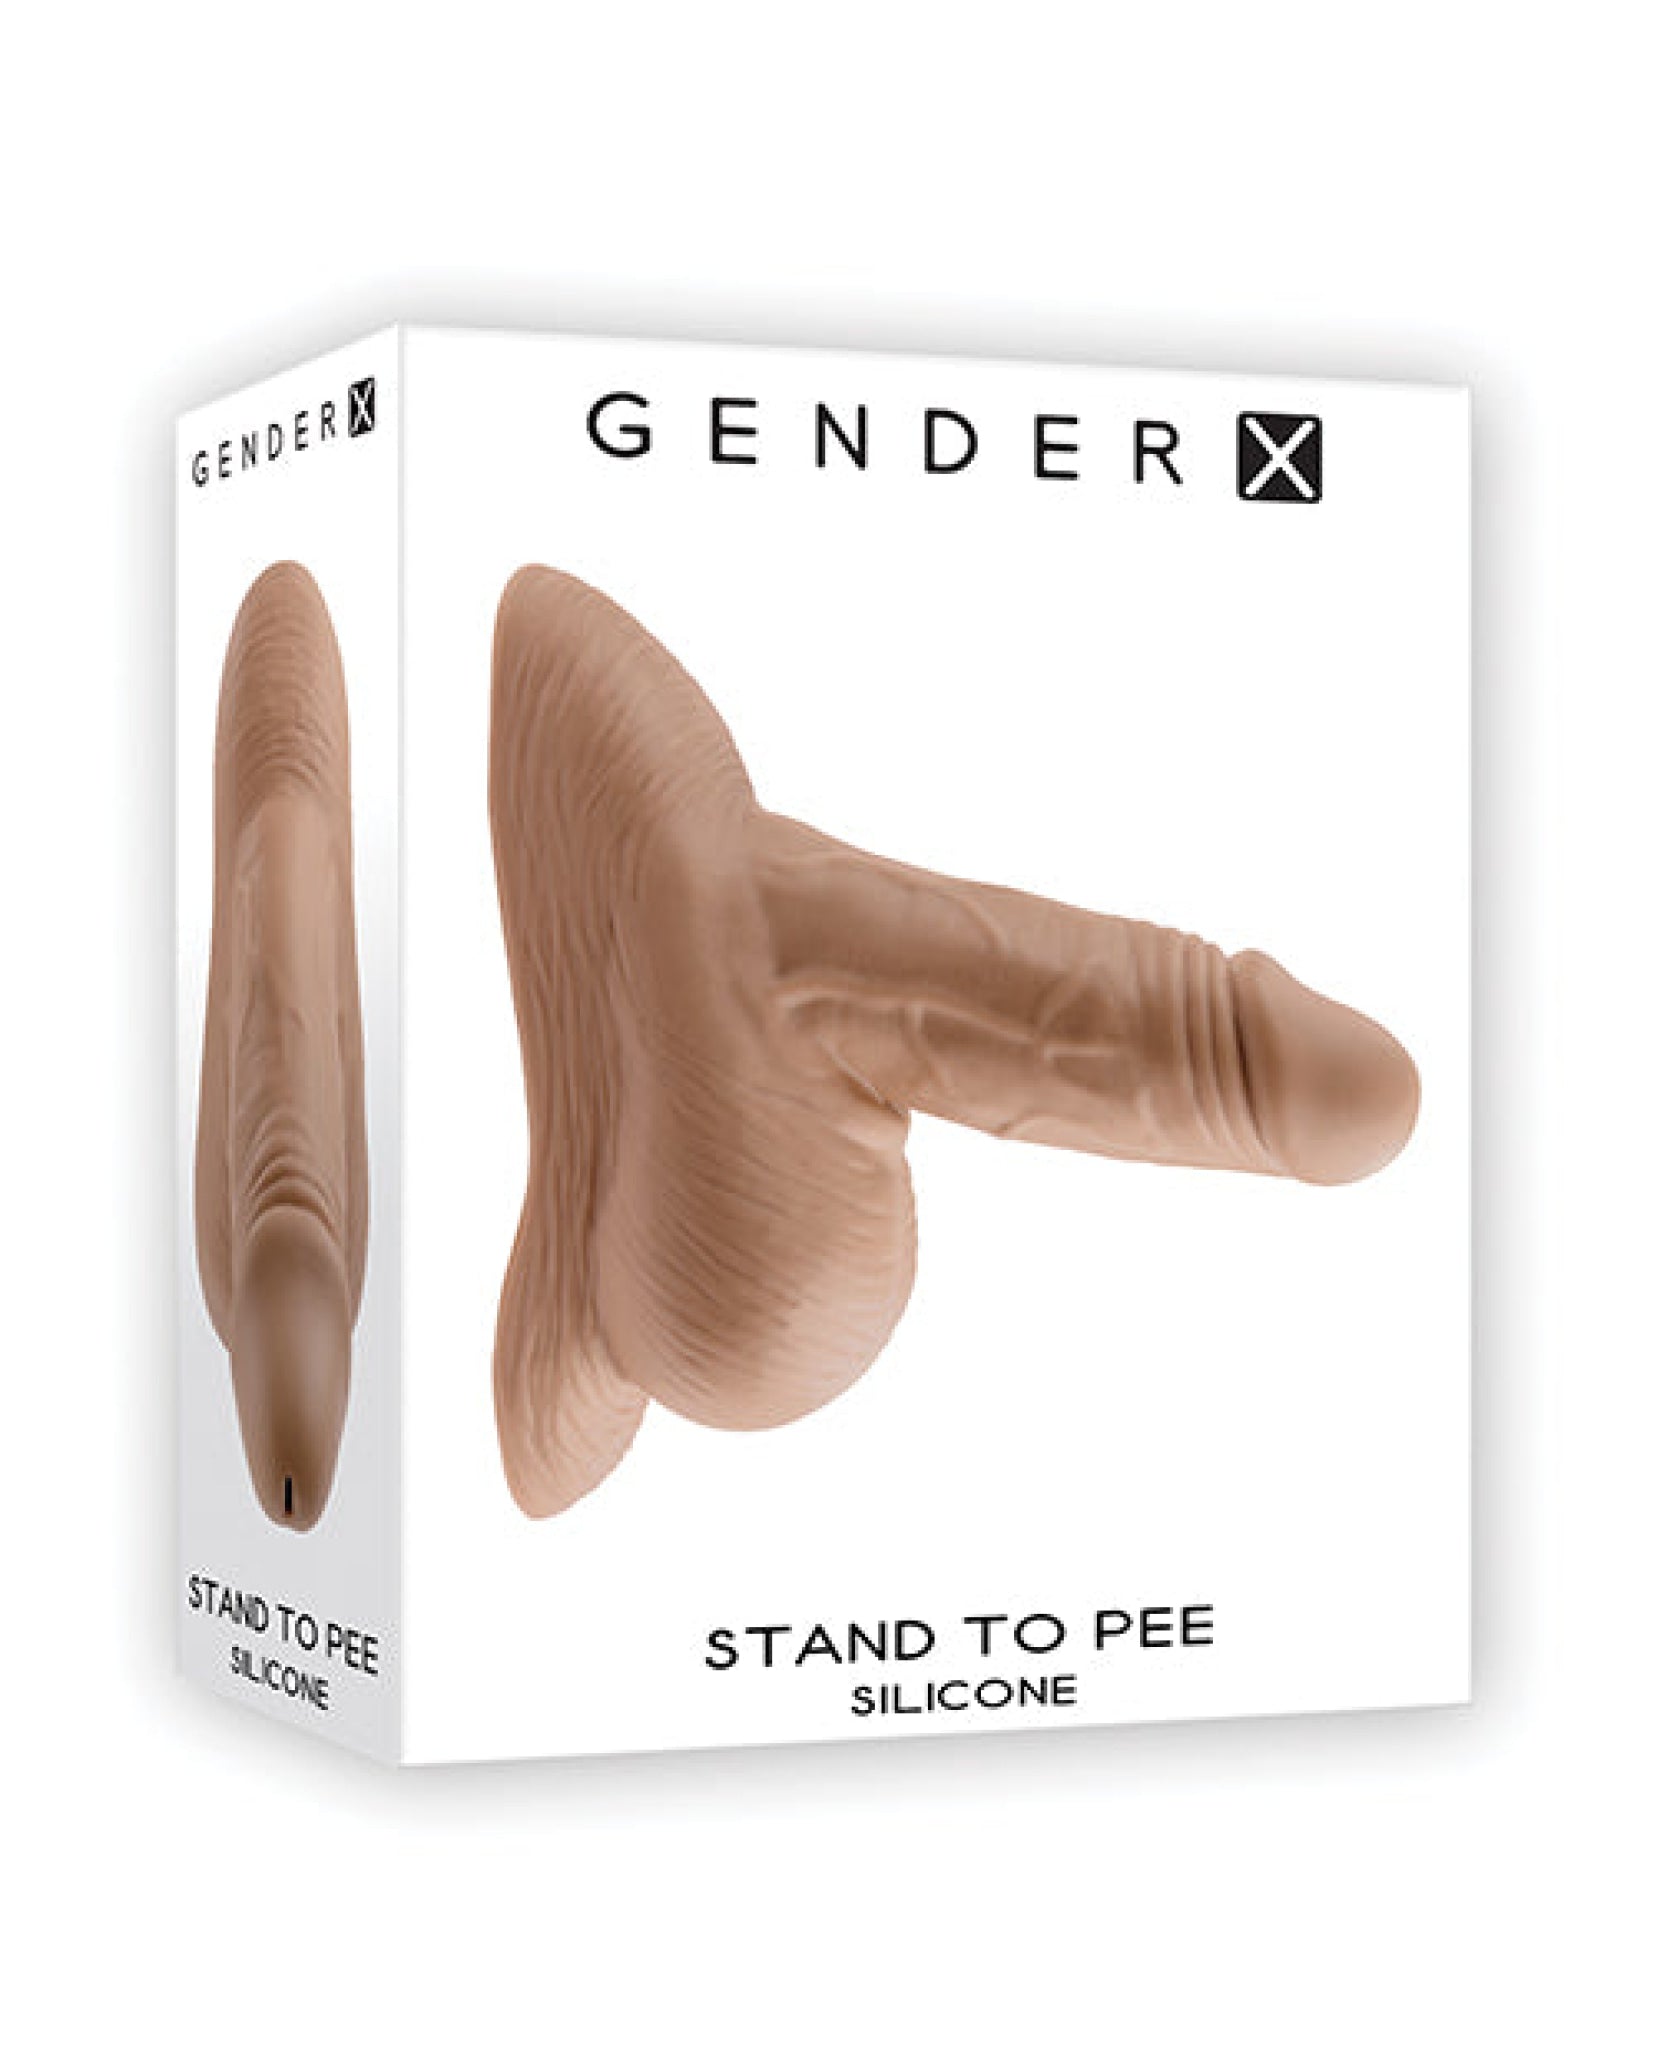 Gender X Silicone Stand To Pee Gender X